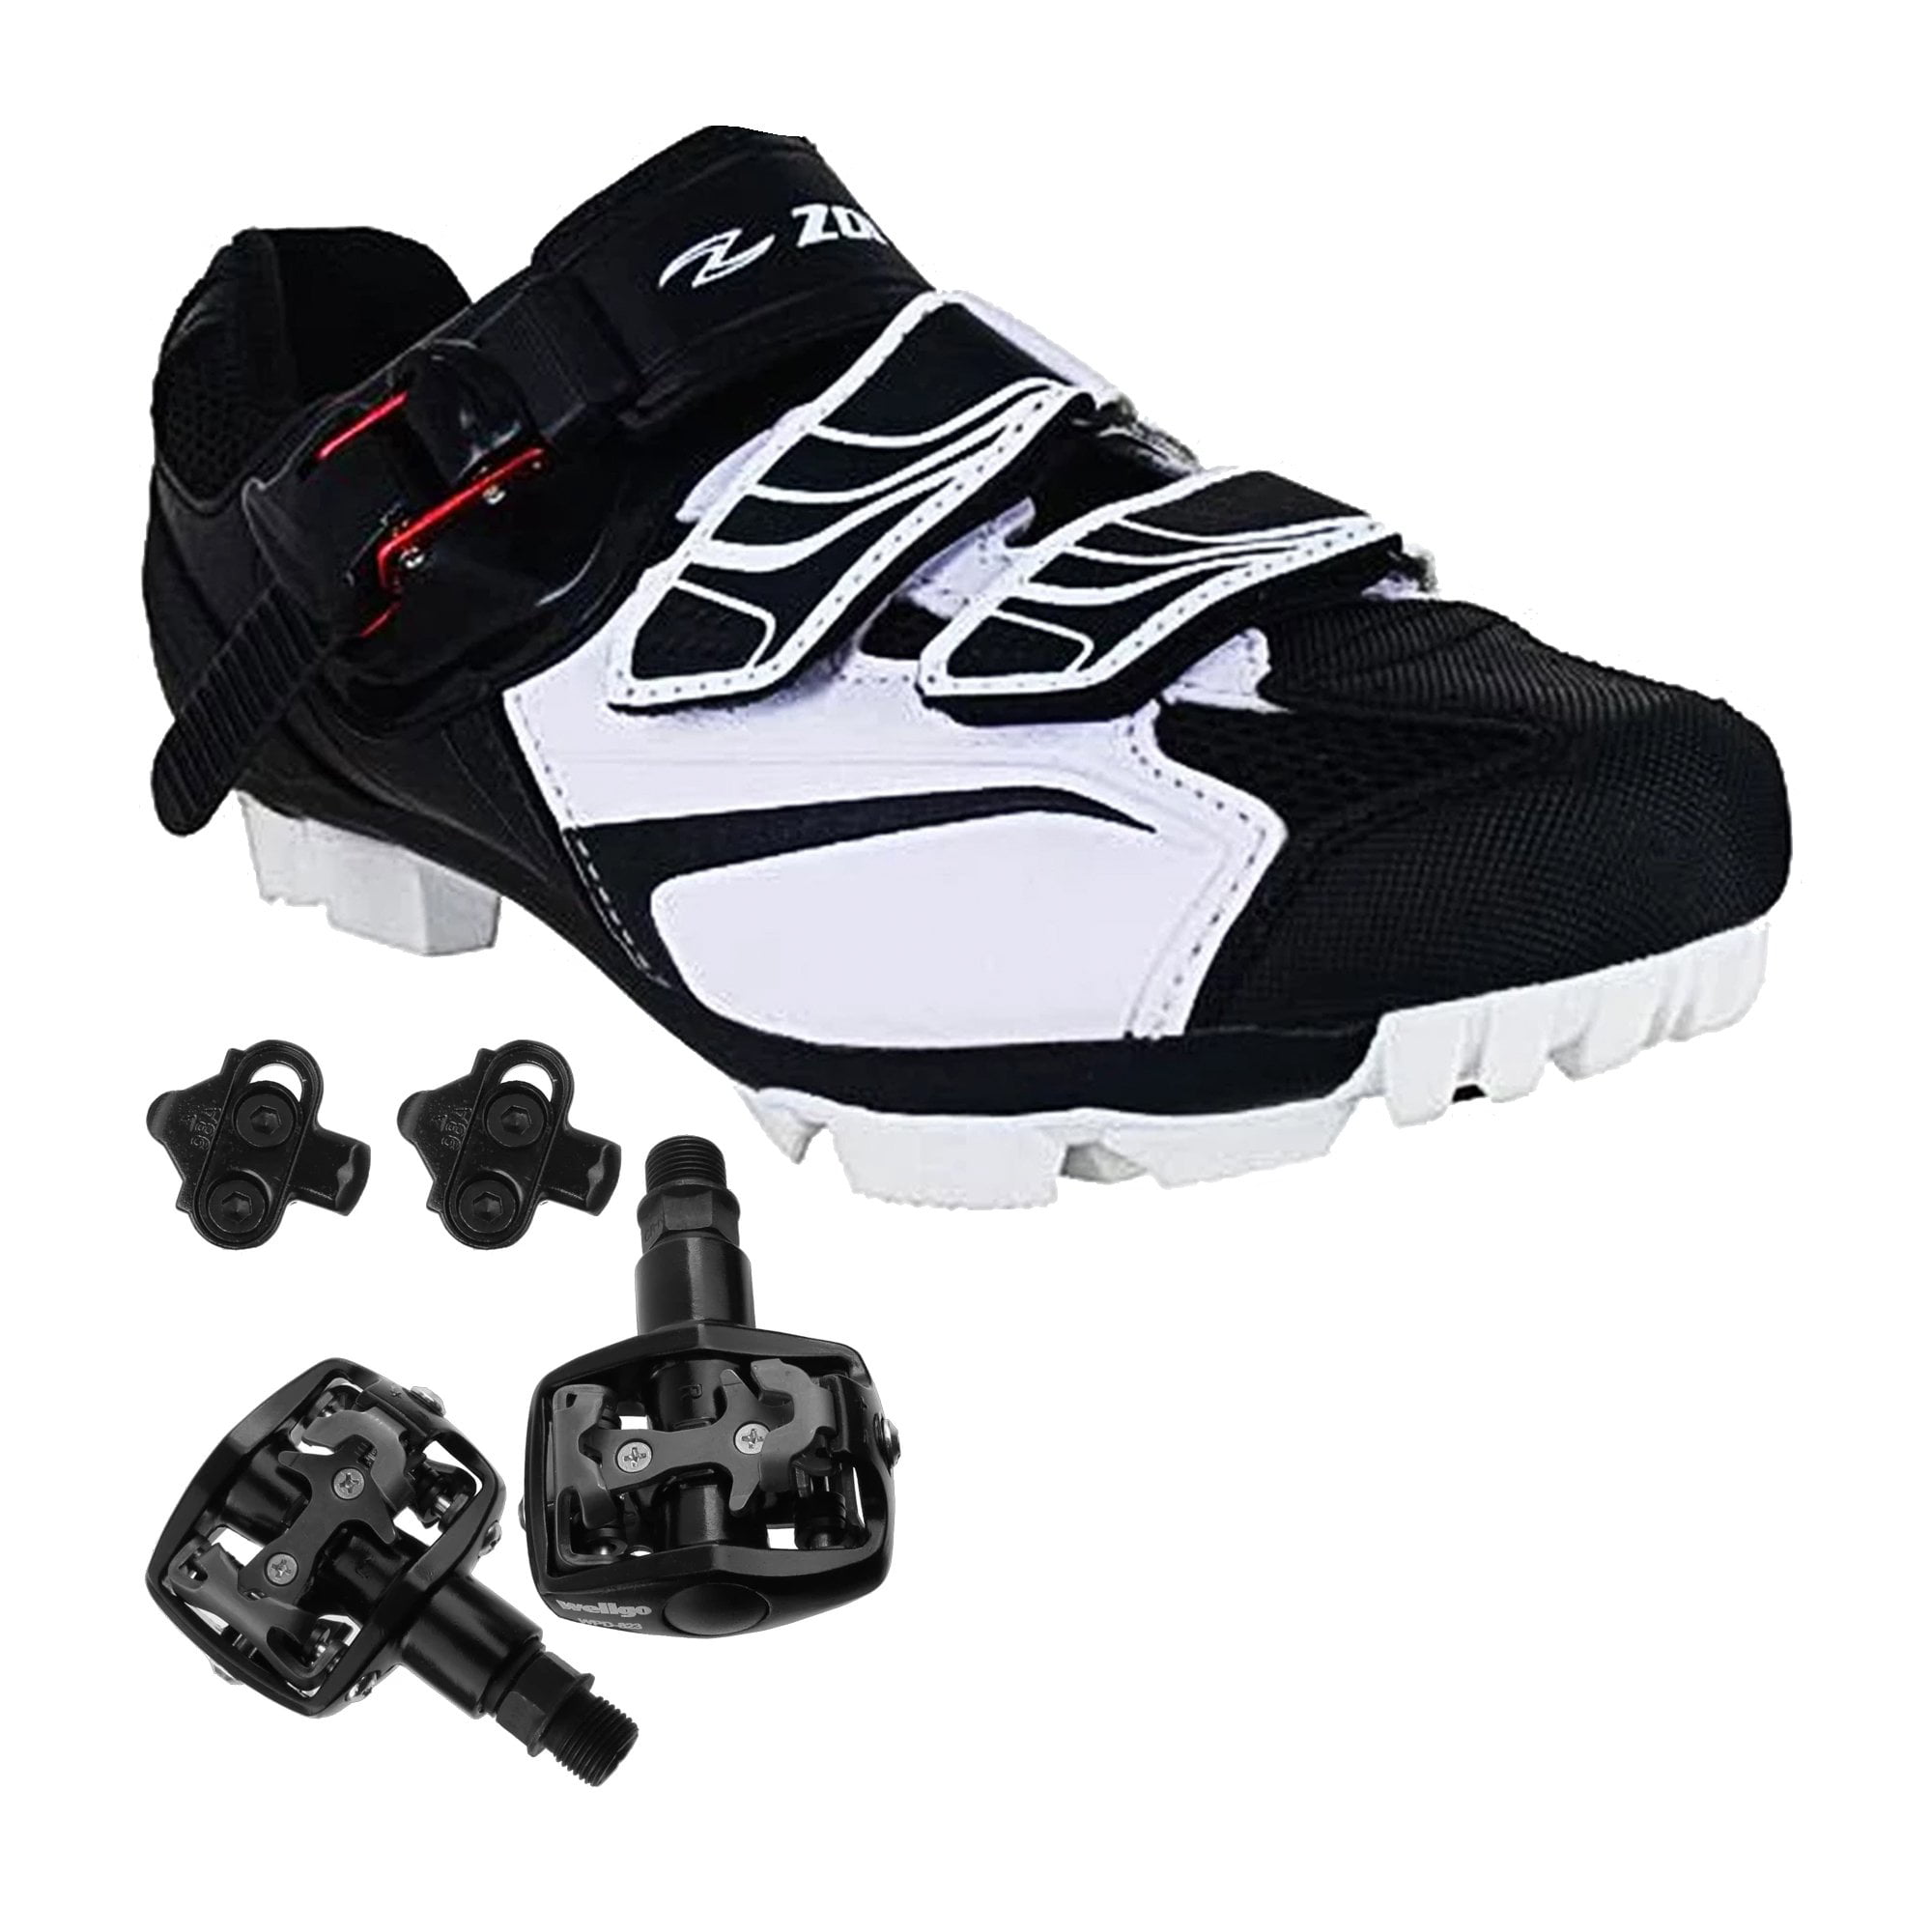 Zol Mountain Bike Cleated Indoor/Outdoor Cycling Shoe 